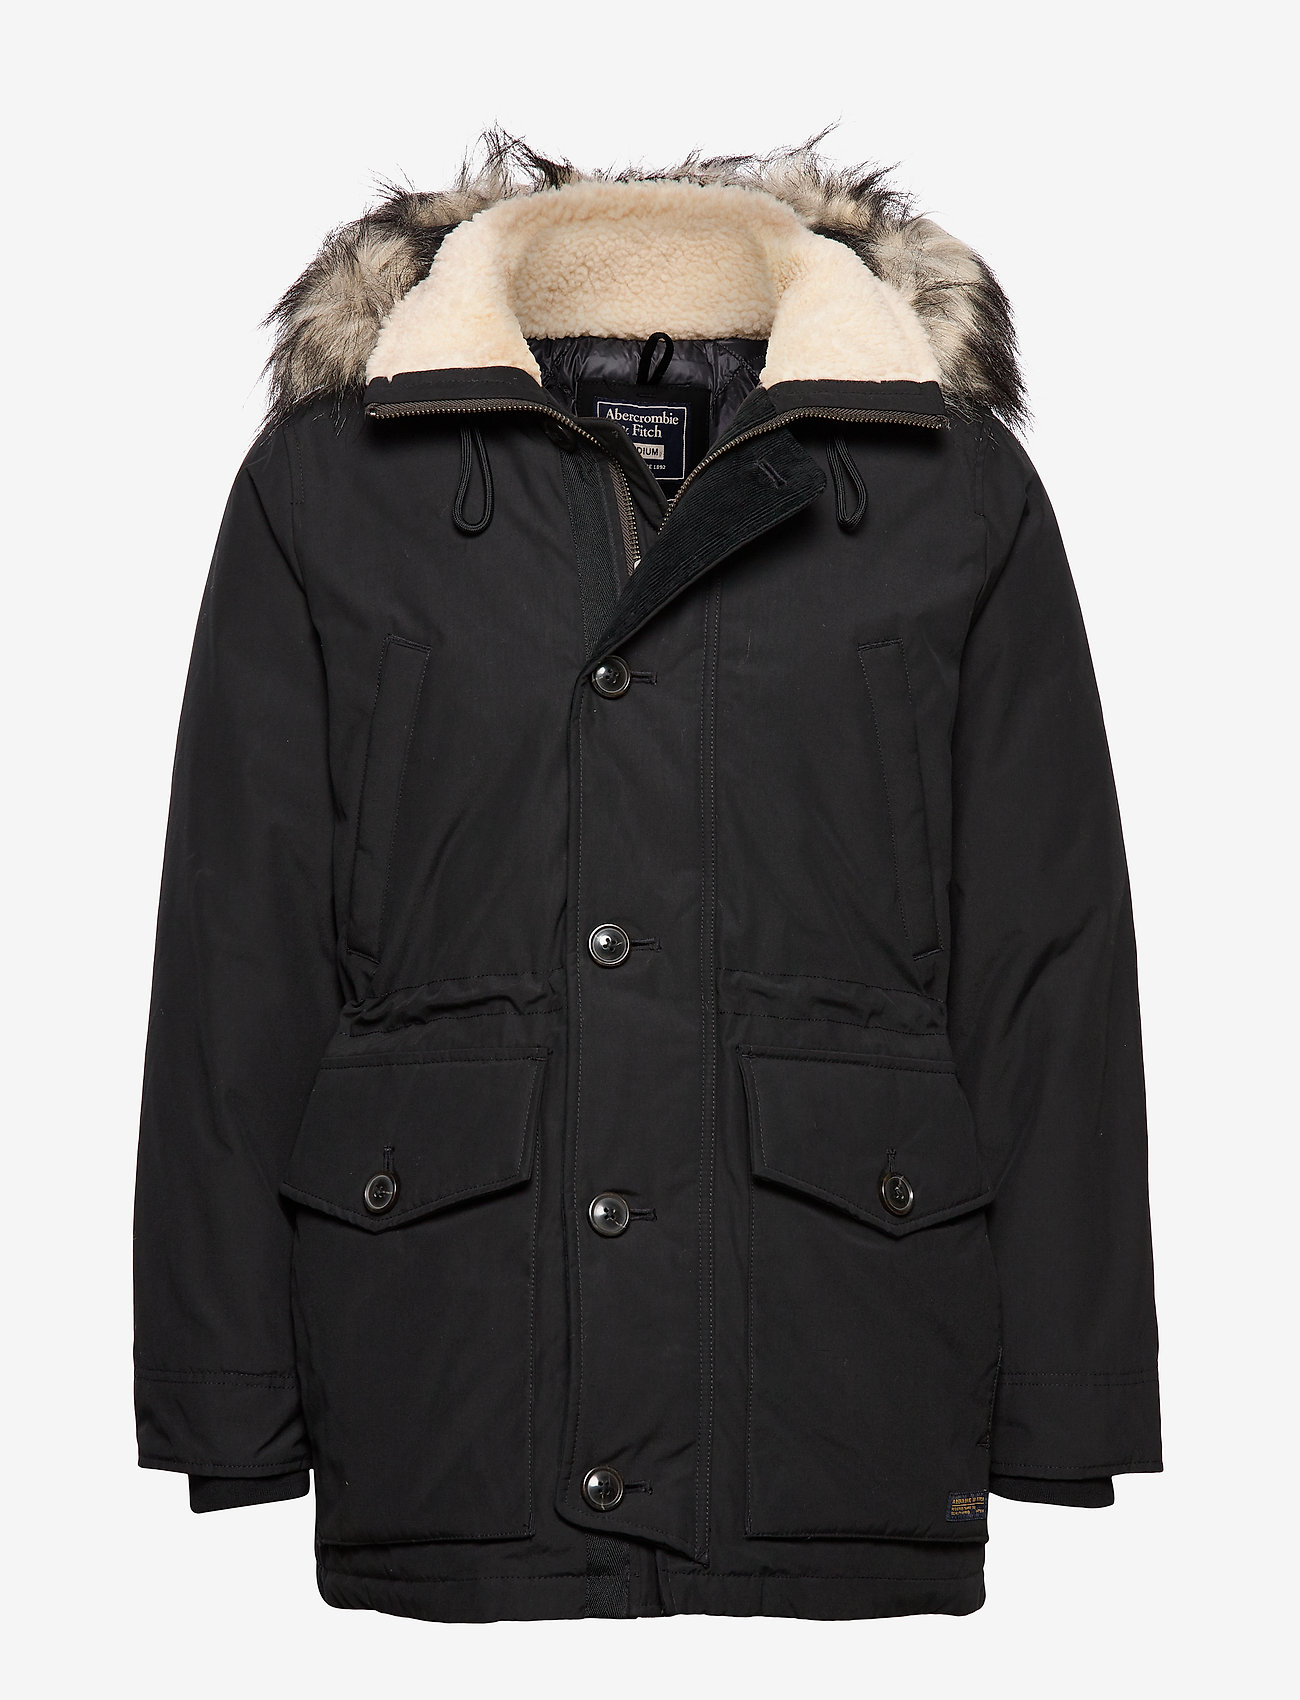 ultra parka abercrombie review